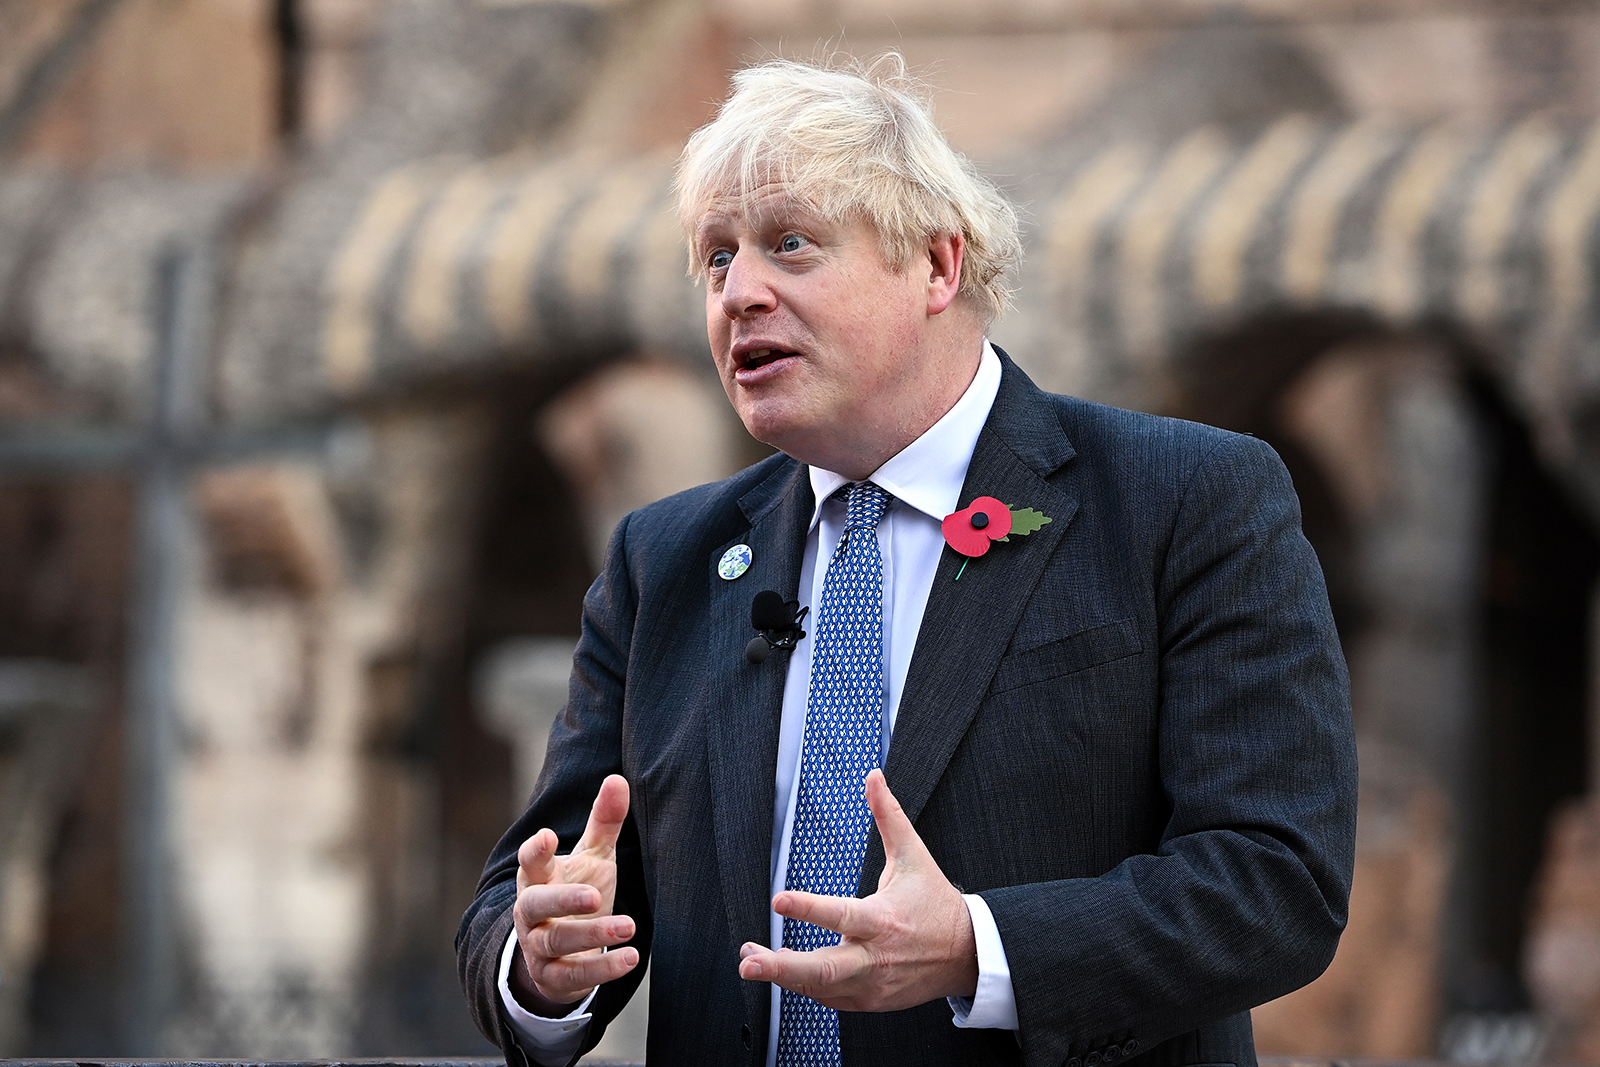 British Prime Minister Boris Johnson, visits the Colosseum during the G20 summit on October 30, in Rome.